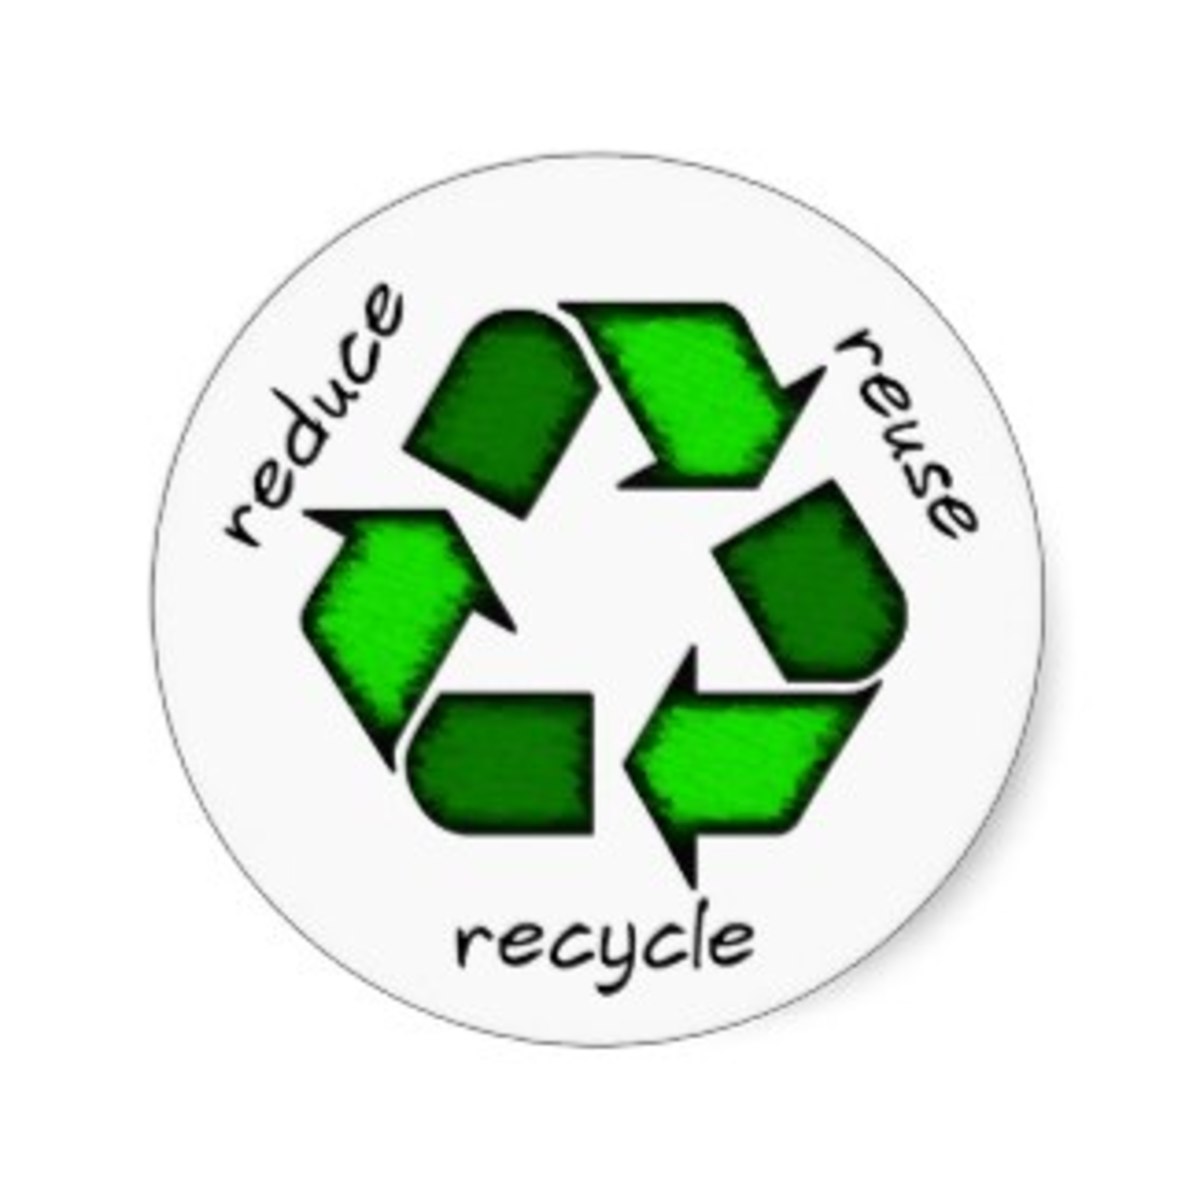 Recycling Worksheets for Kids | HubPages